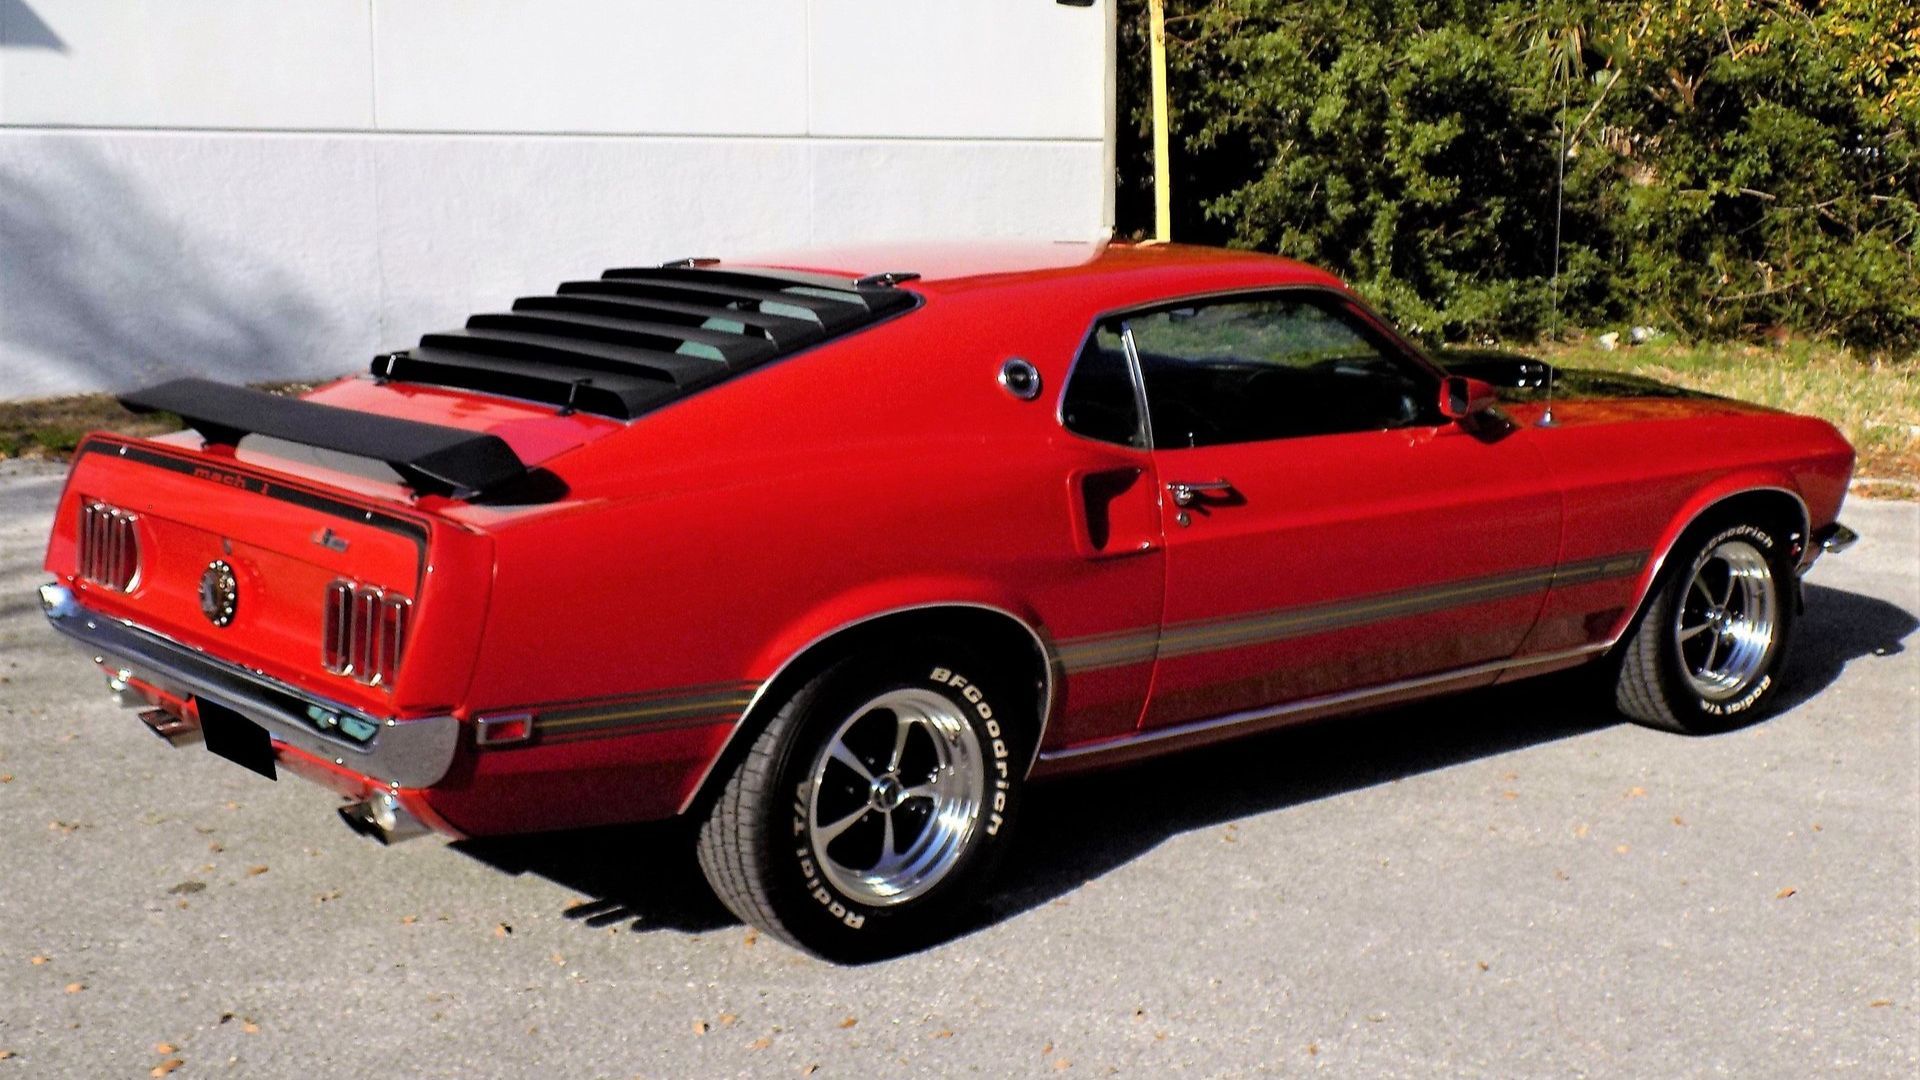 1969 Ford Mustang Mach 1 Is Just Plain Cool